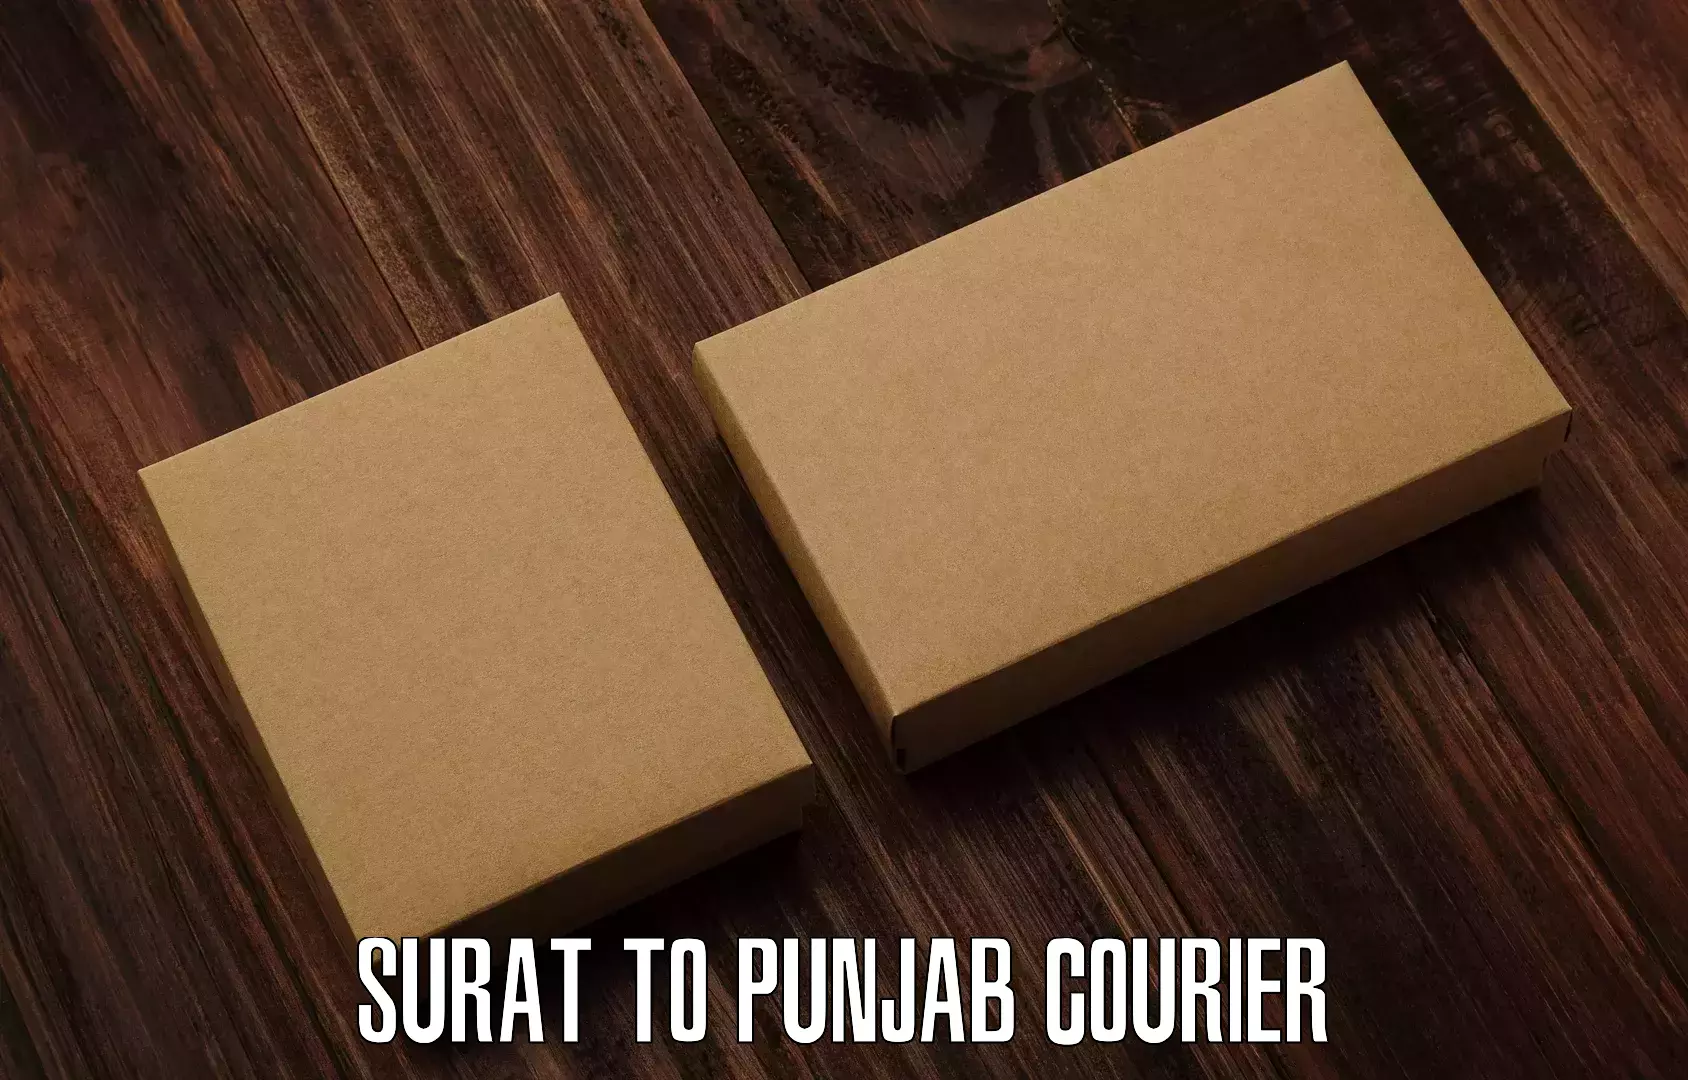 Same-day delivery options Surat to Patiala